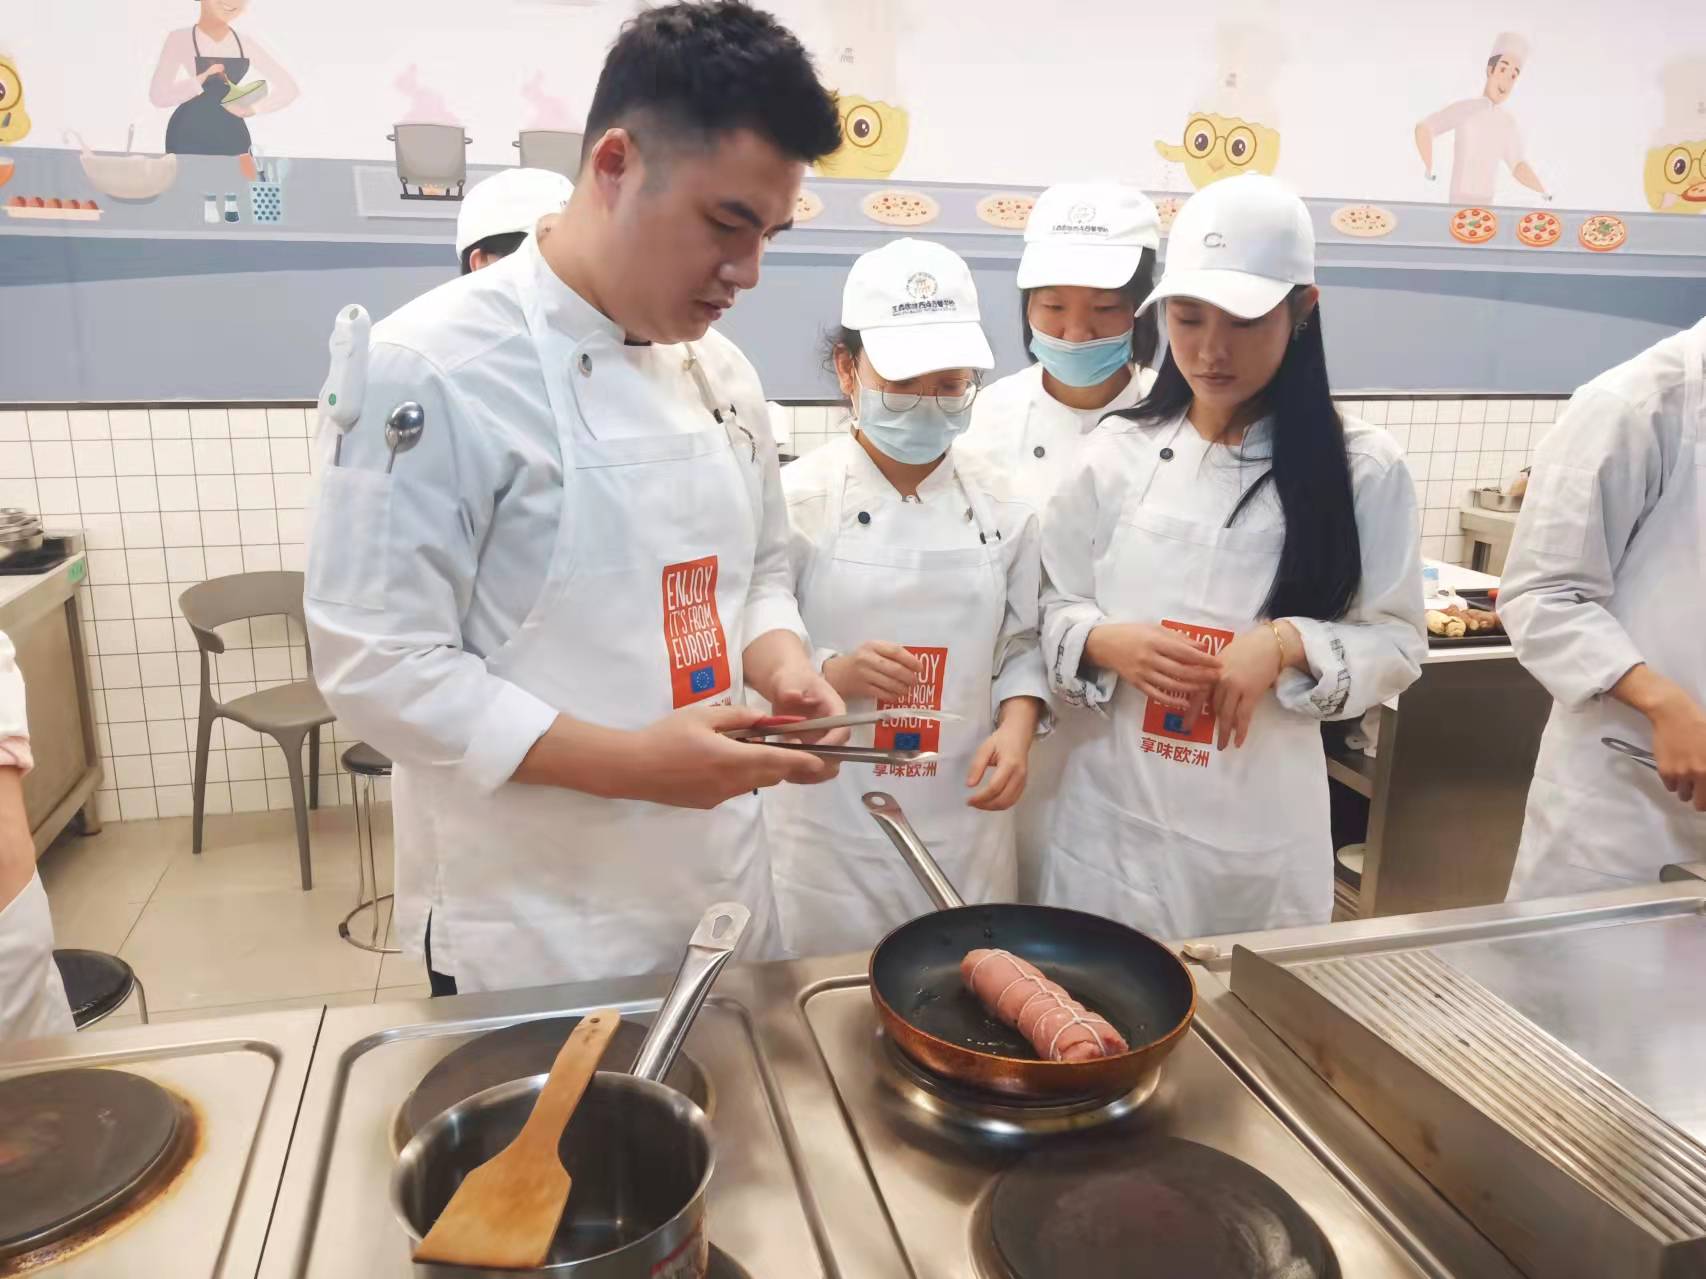 Cook showing students how to prepare a dish